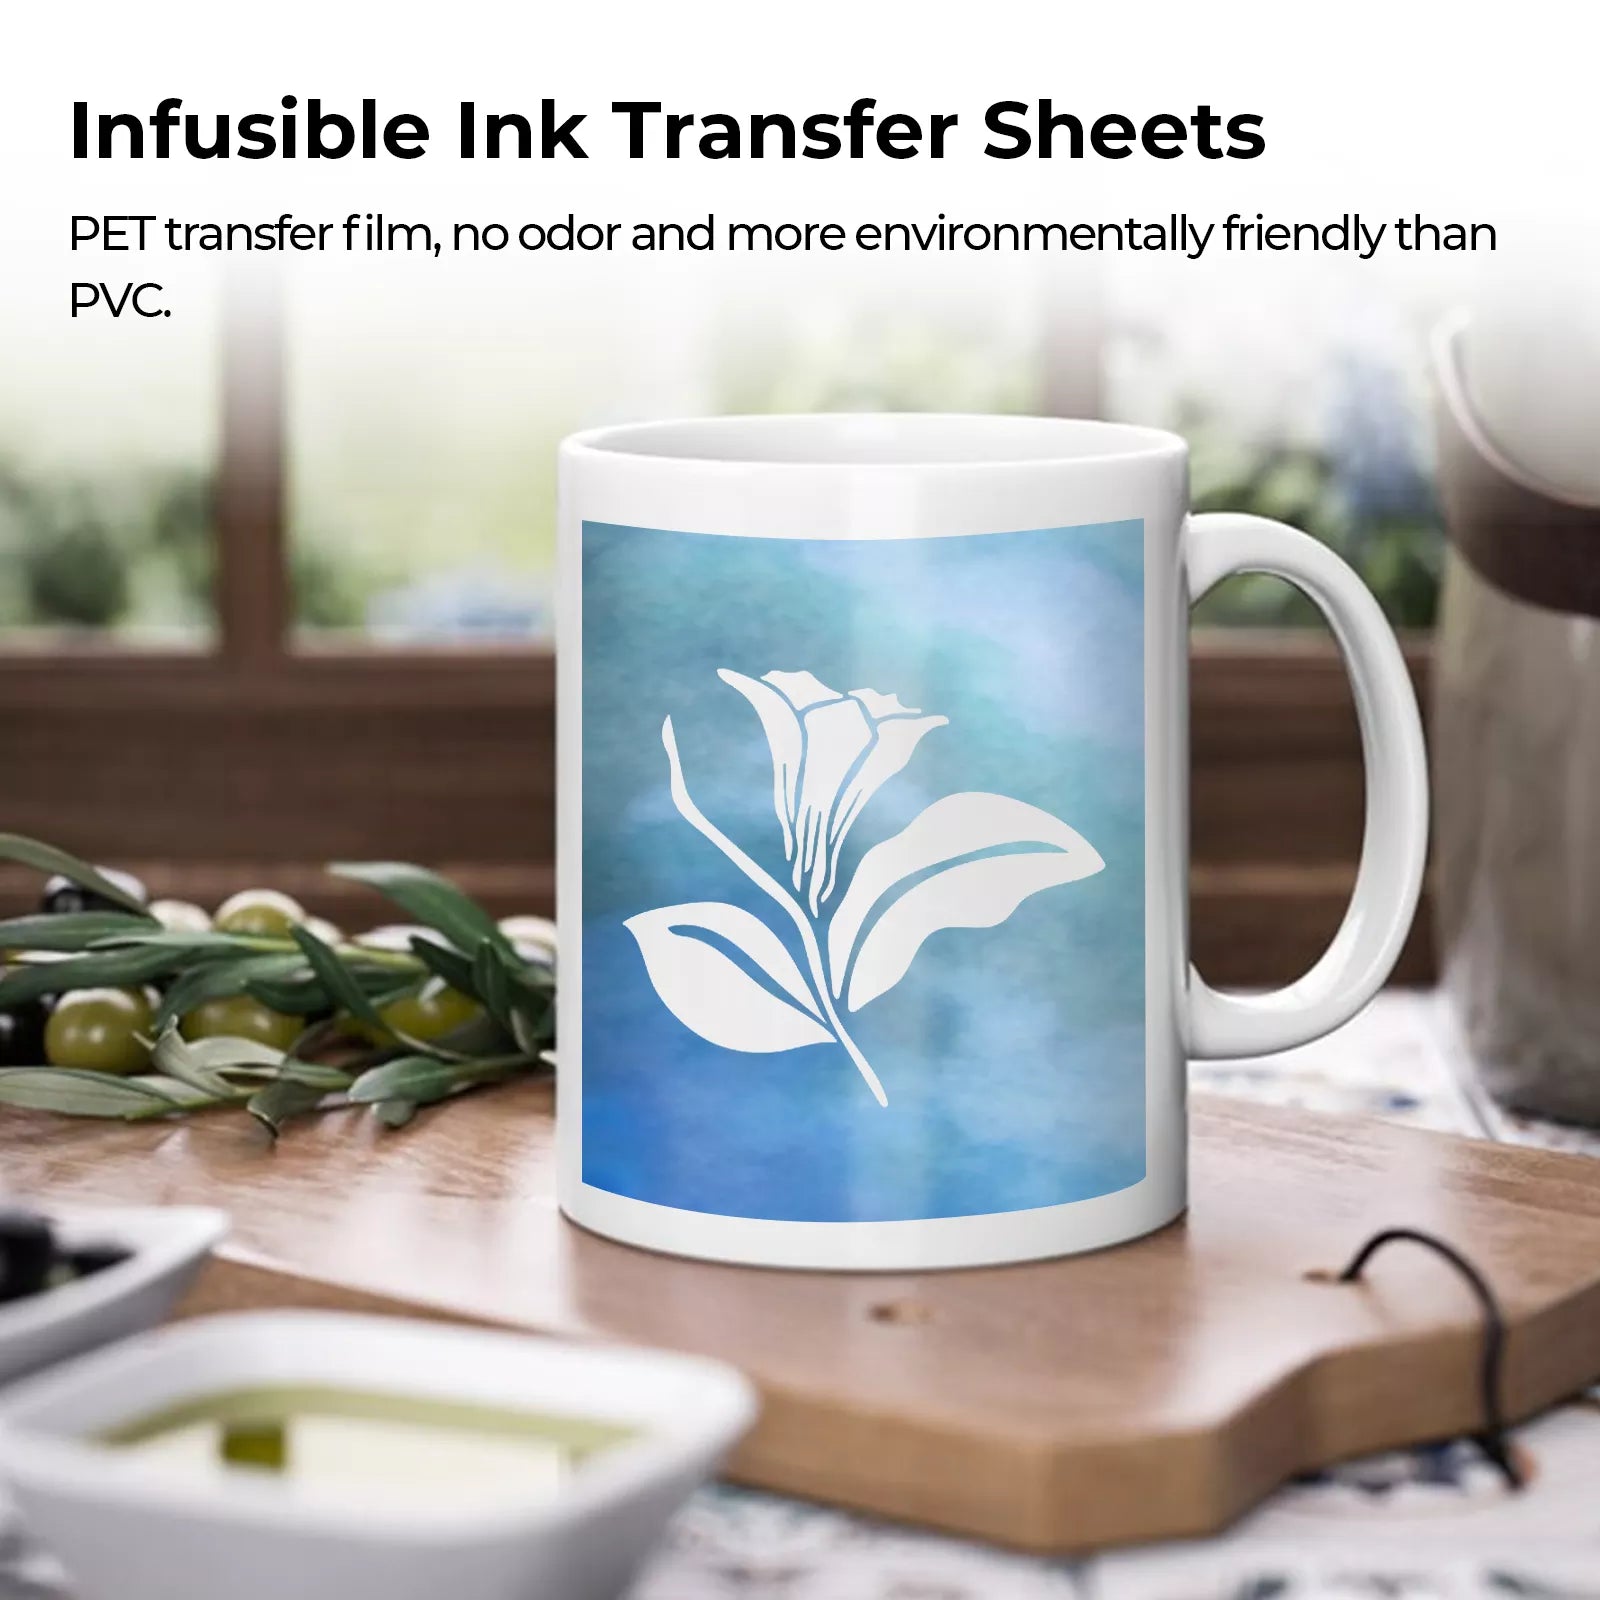 Watercolor Infusible Ink Transfer Sheets (14pcs)